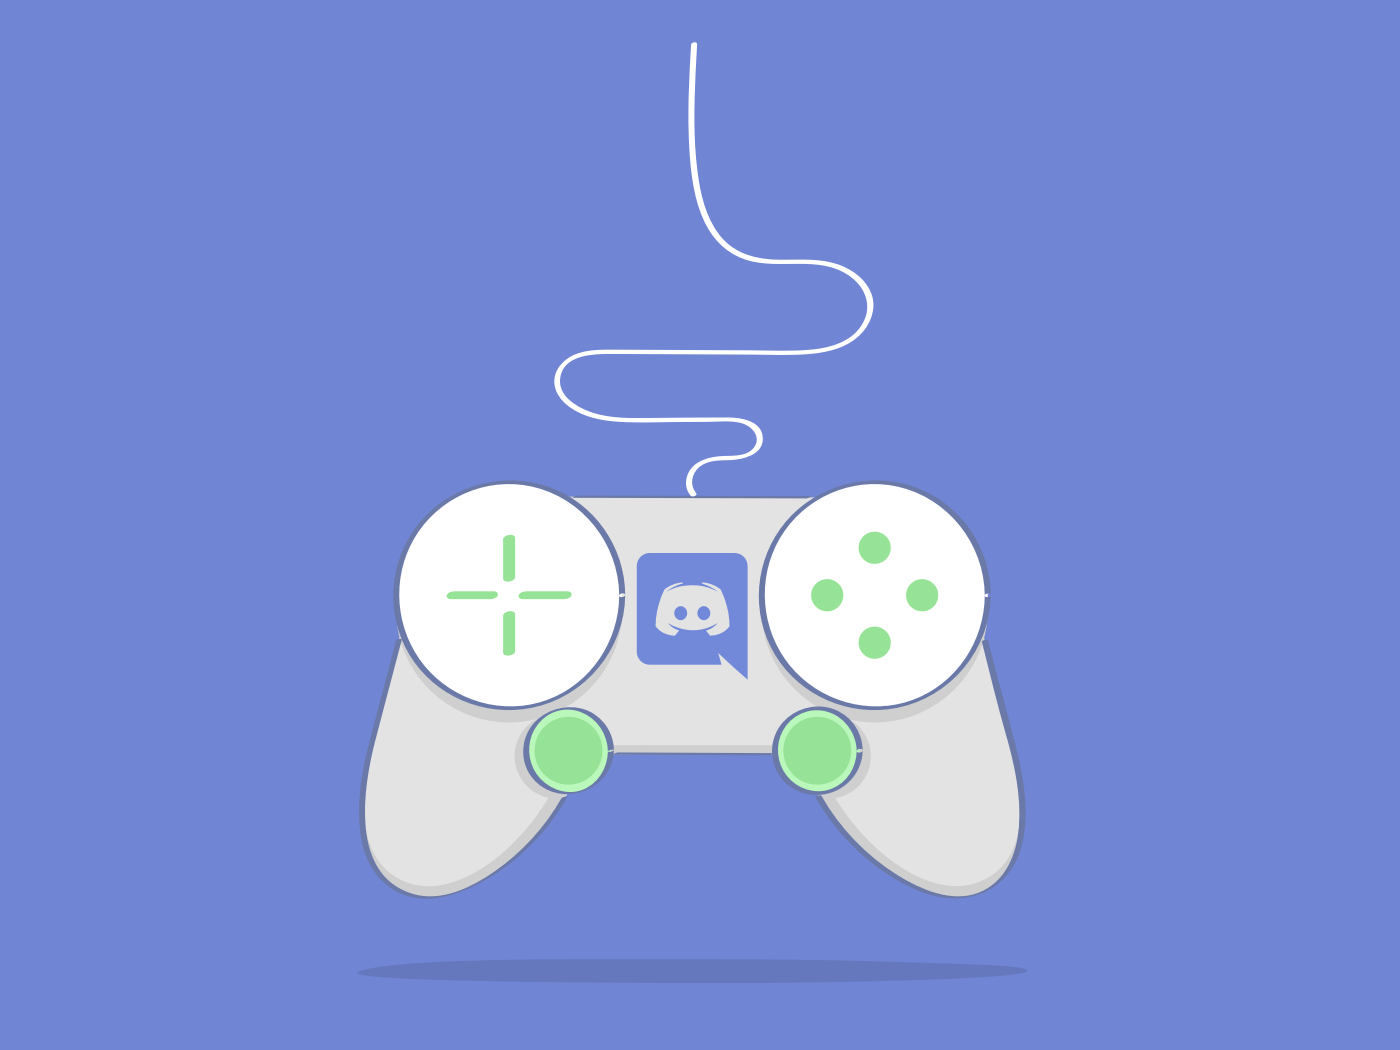 How Discord impacts video game marketing